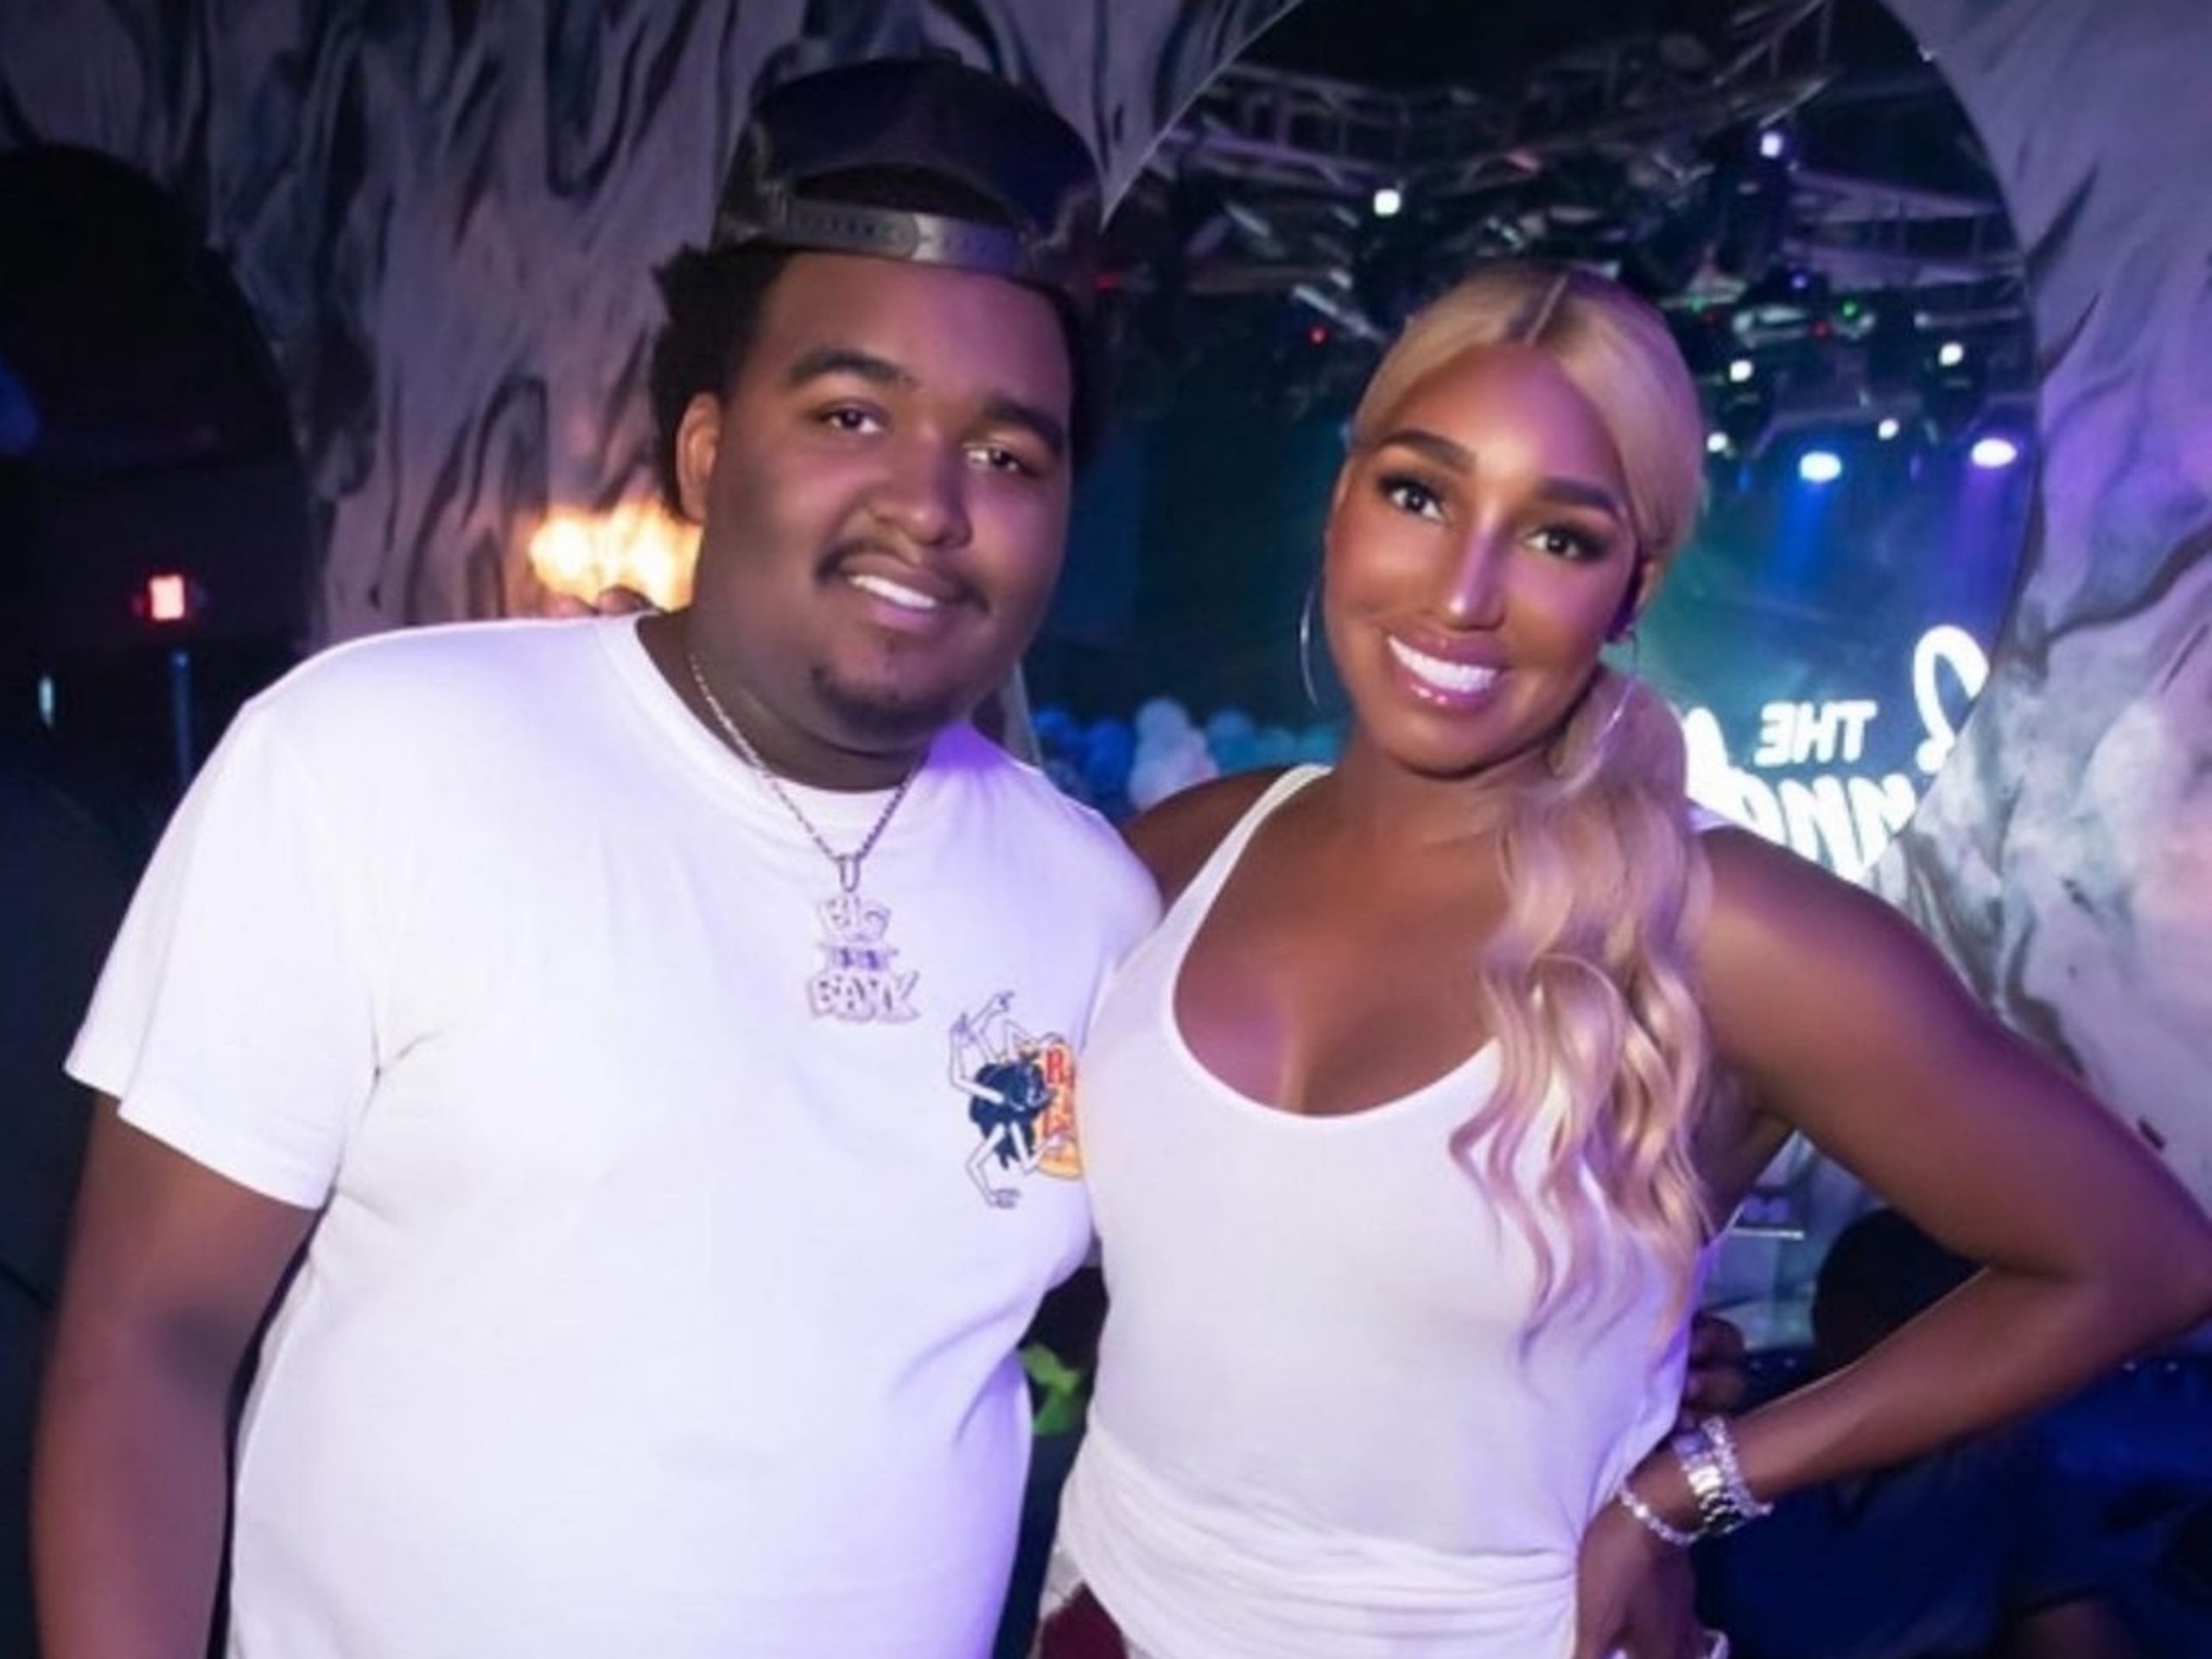 Nene Leakes Confirms Her Son Brentt Suffered a Stroke and Heart Failure